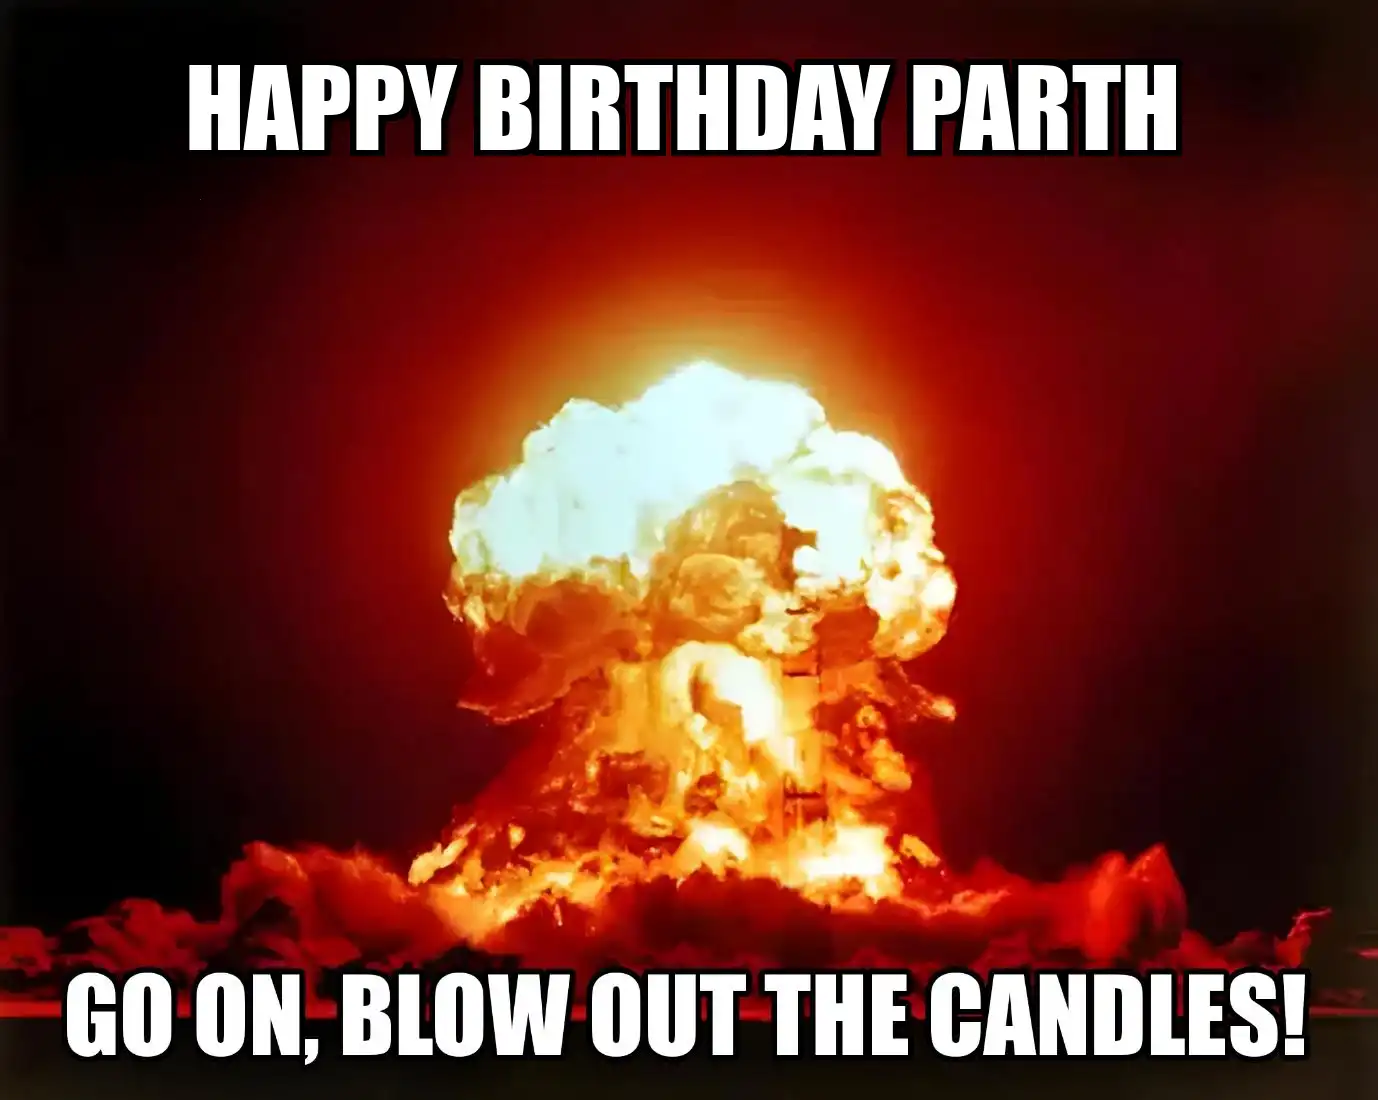 Happy Birthday Parth Go On Blow Out The Candles Meme